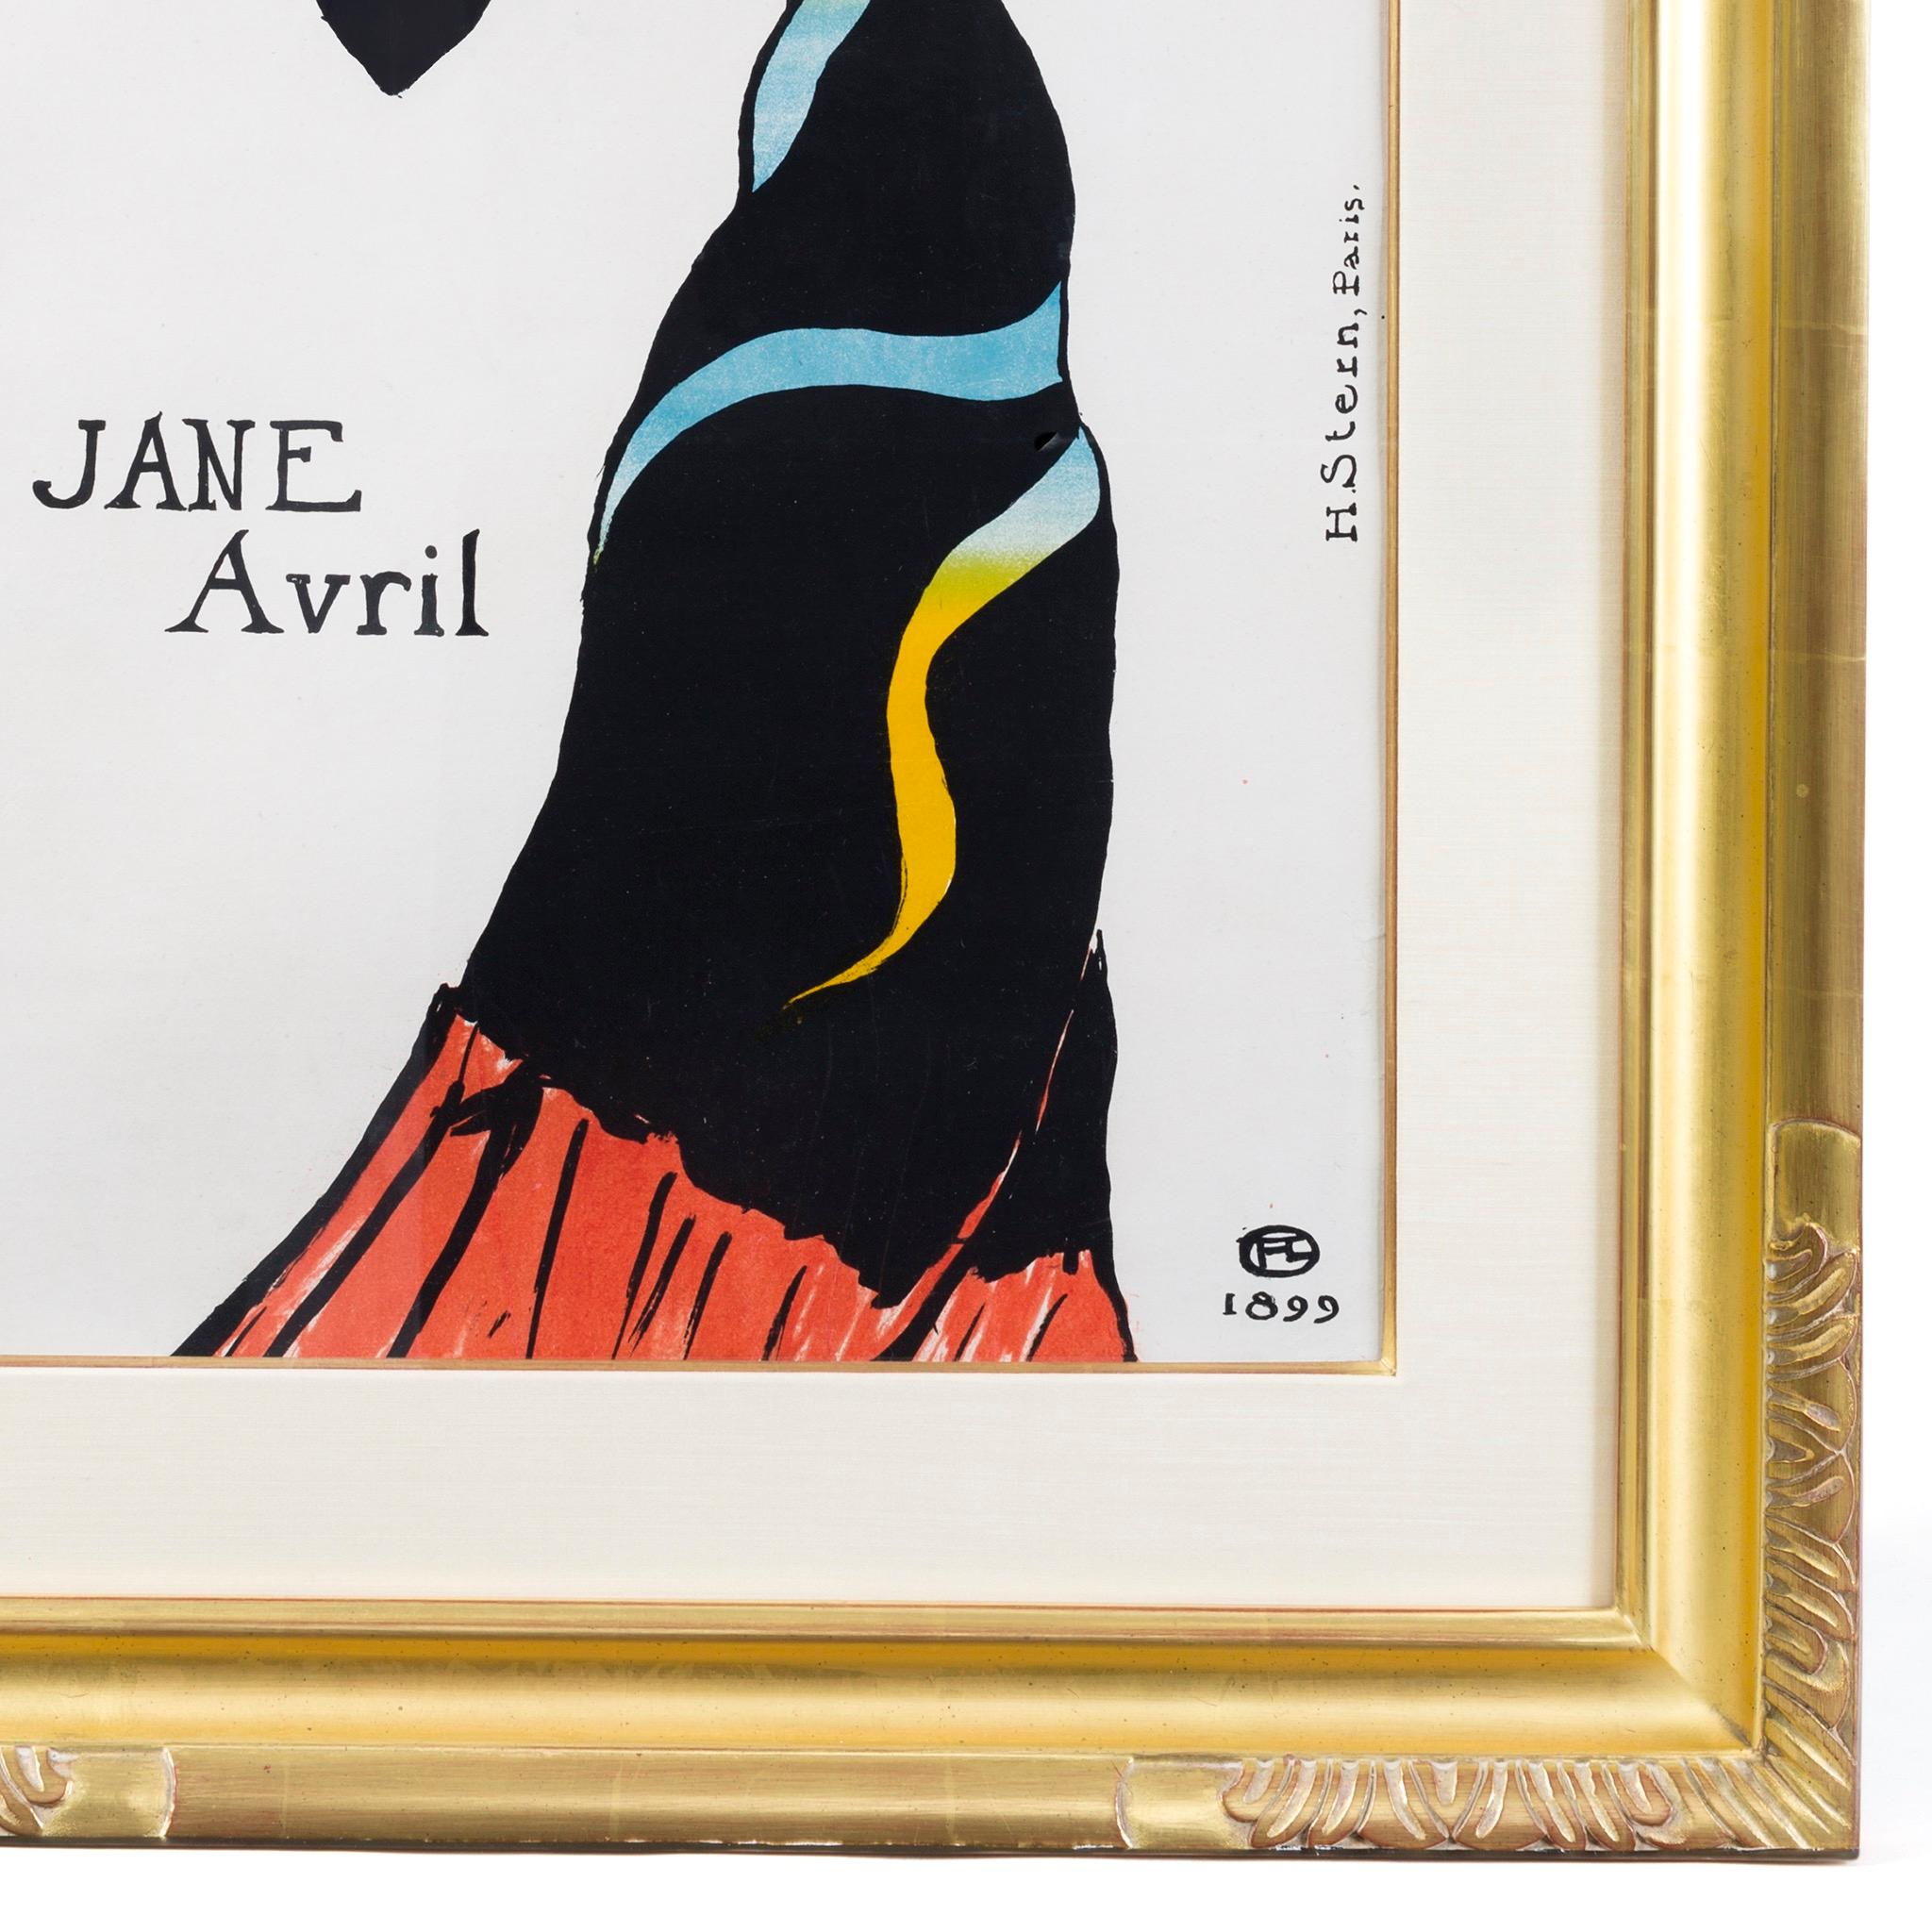 this poster by henri de toulouse-lautrec of jane avril celebrates which aspect of parisian life